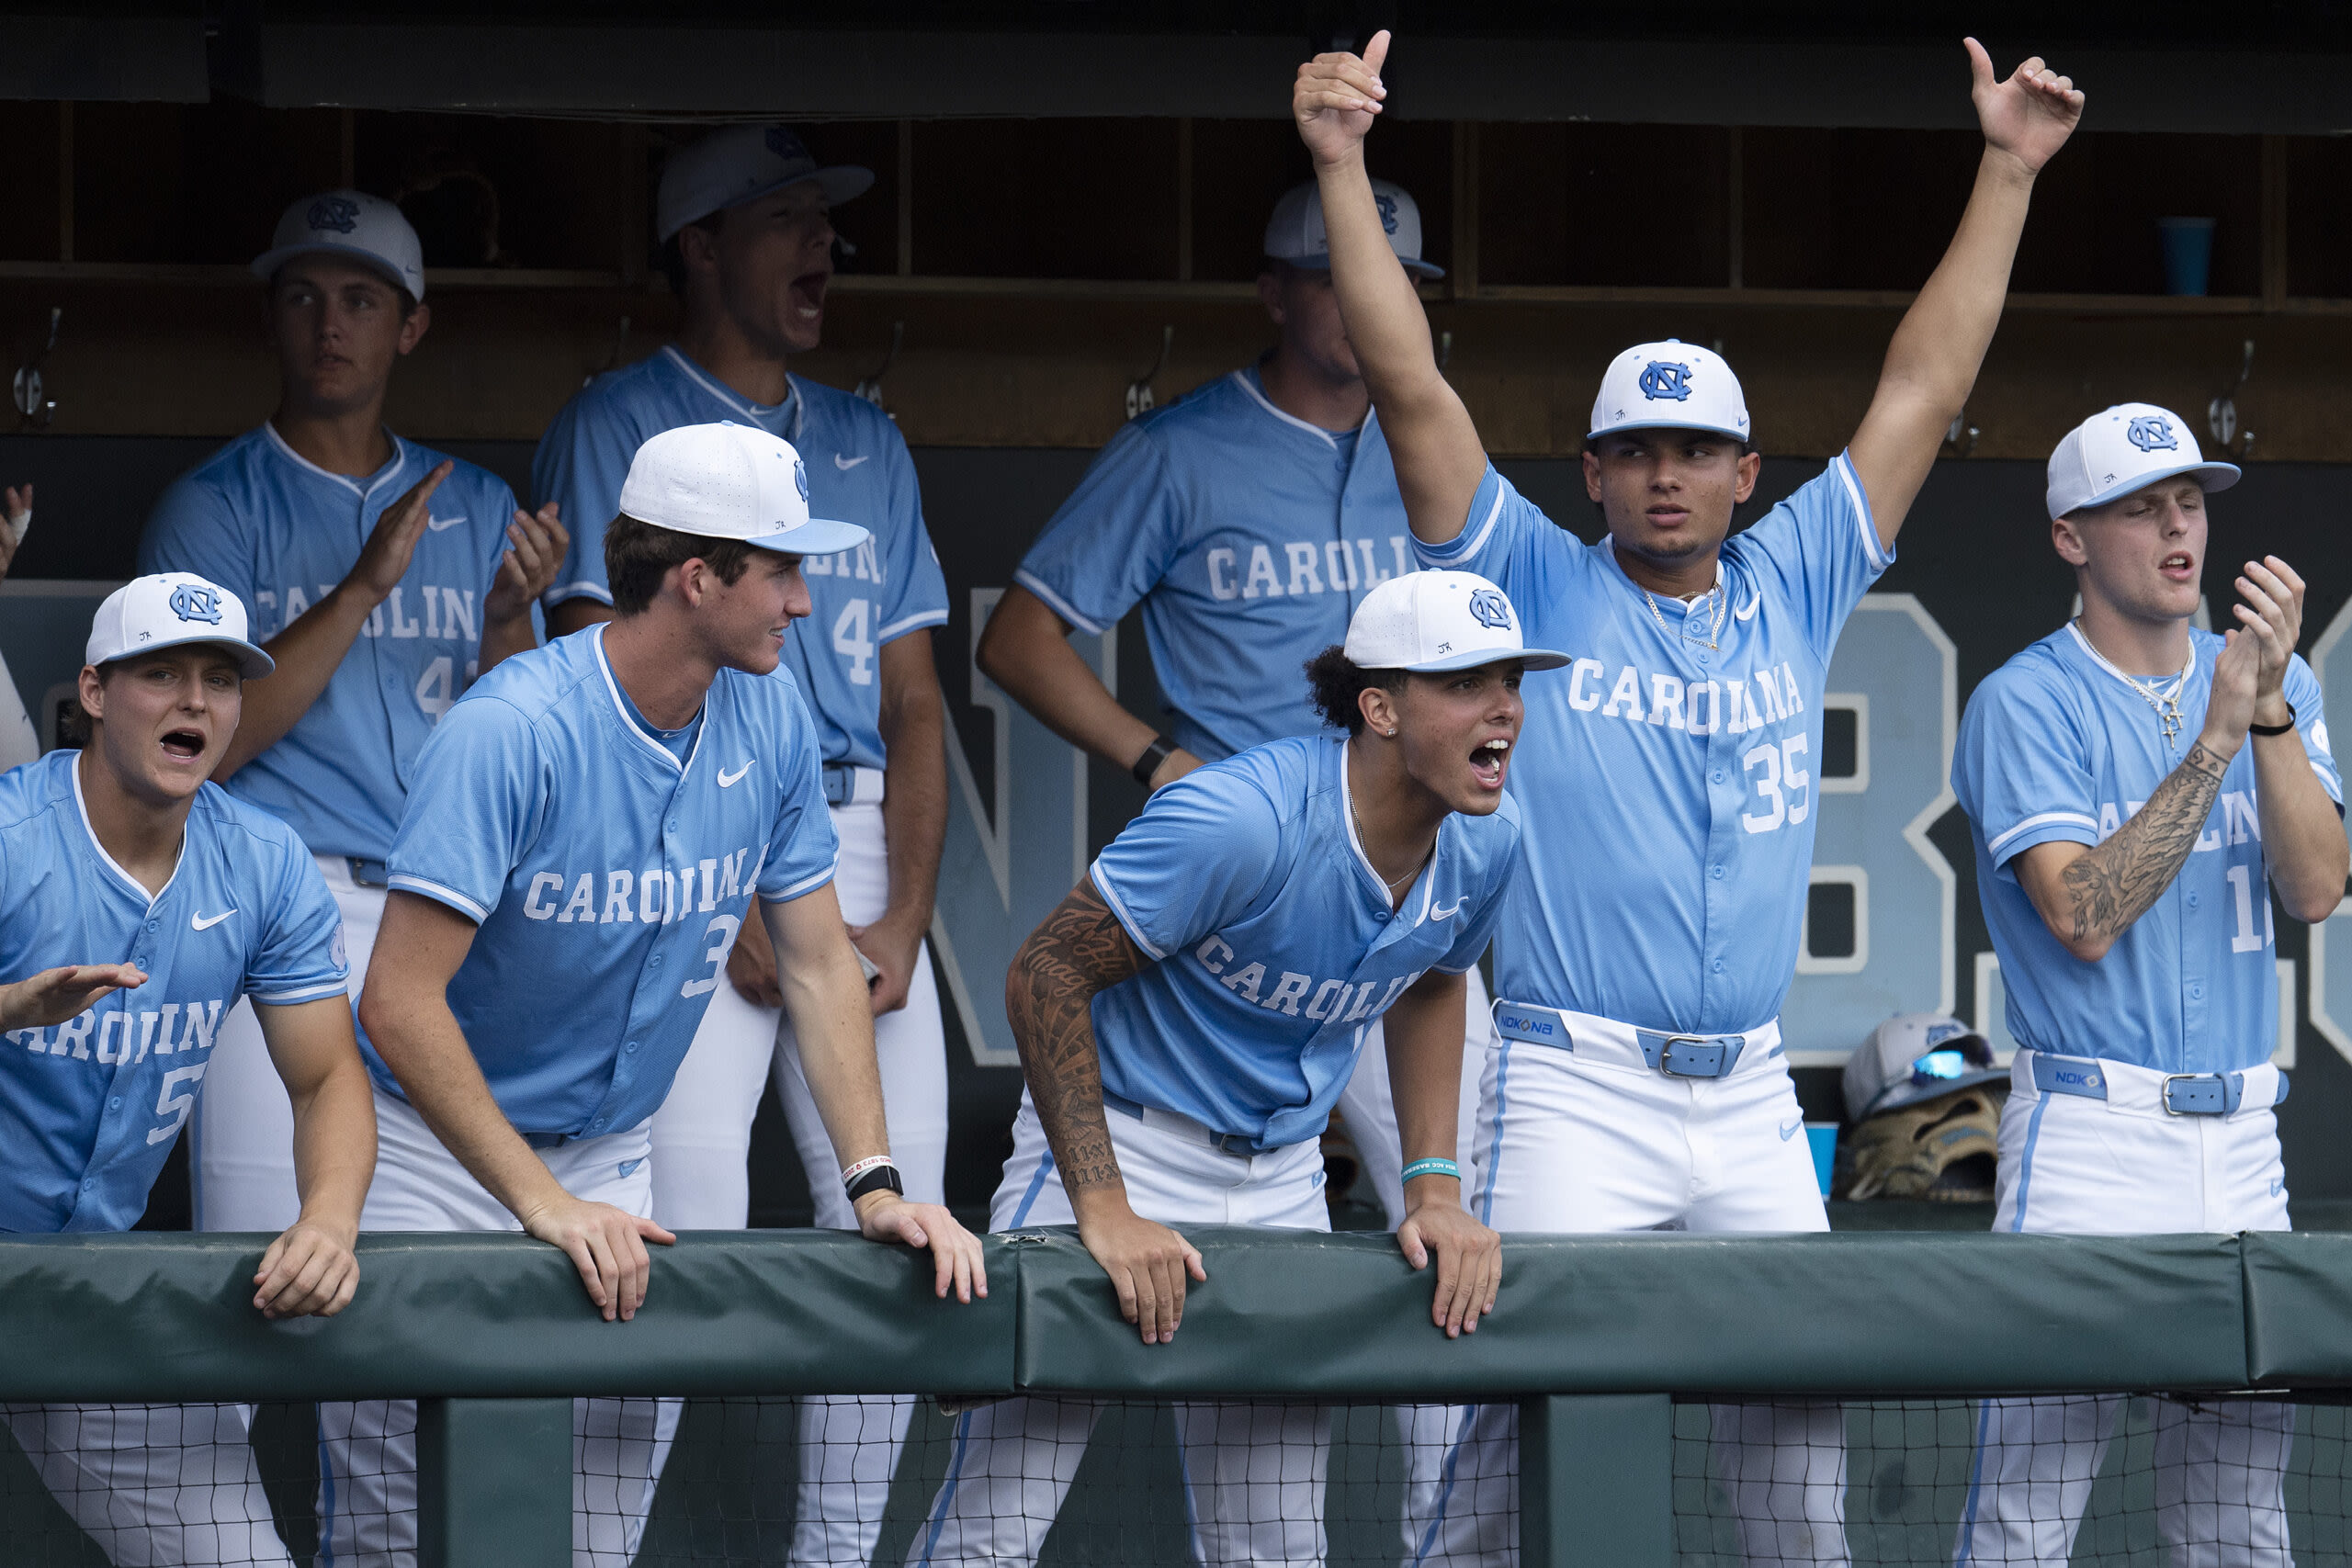 UNC and LSU baseball set TV ratings record in regional